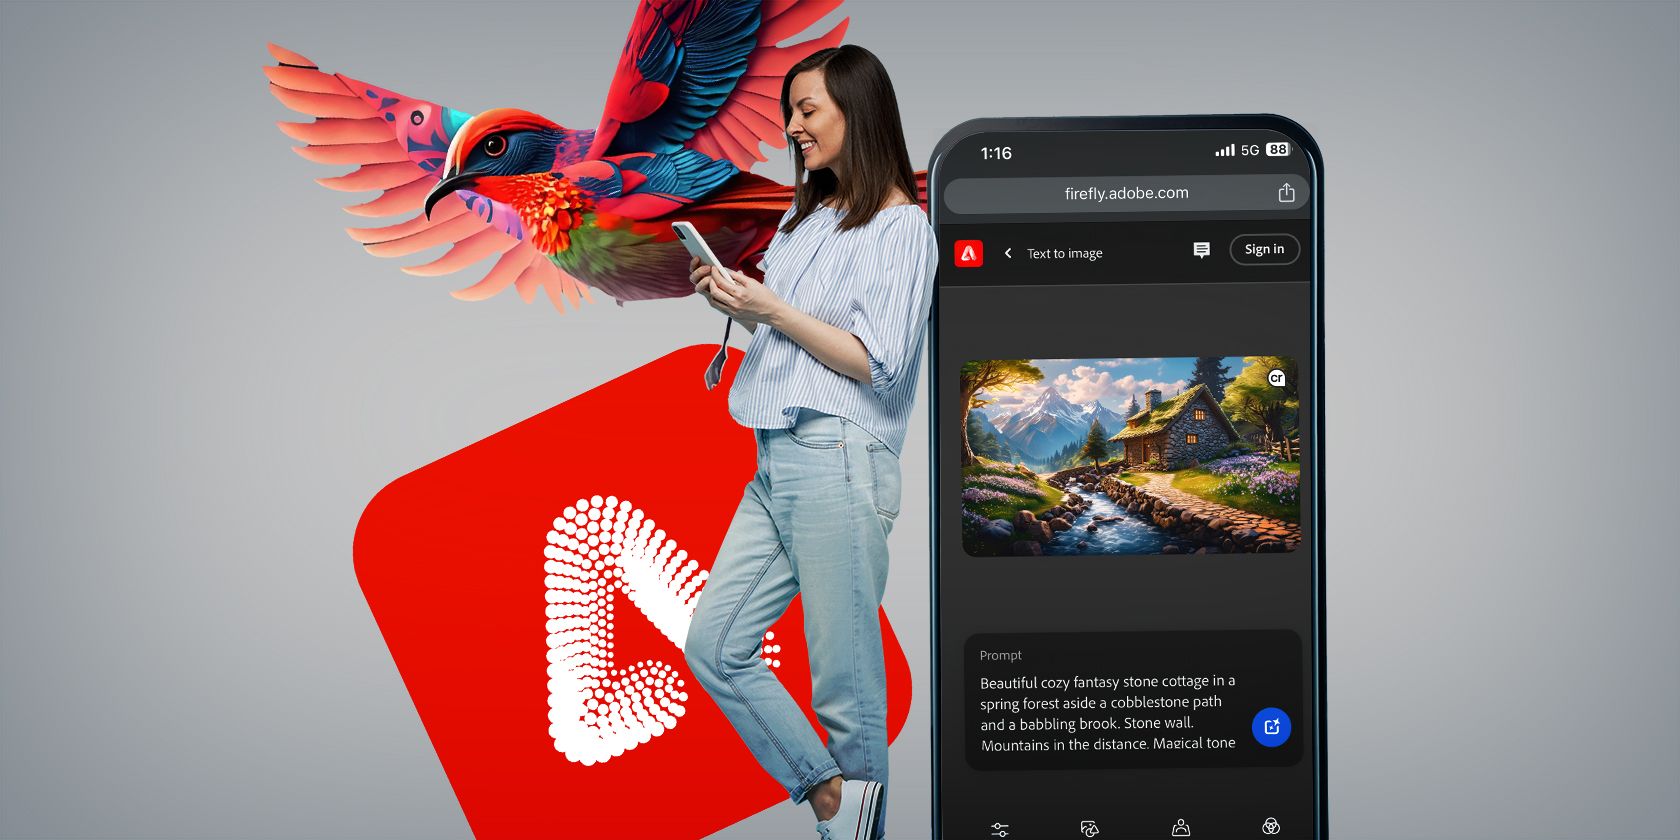 A woman interacts with a large, colorful bird illustration emerging from her tablet, with a creative app interface displayed on the screen.